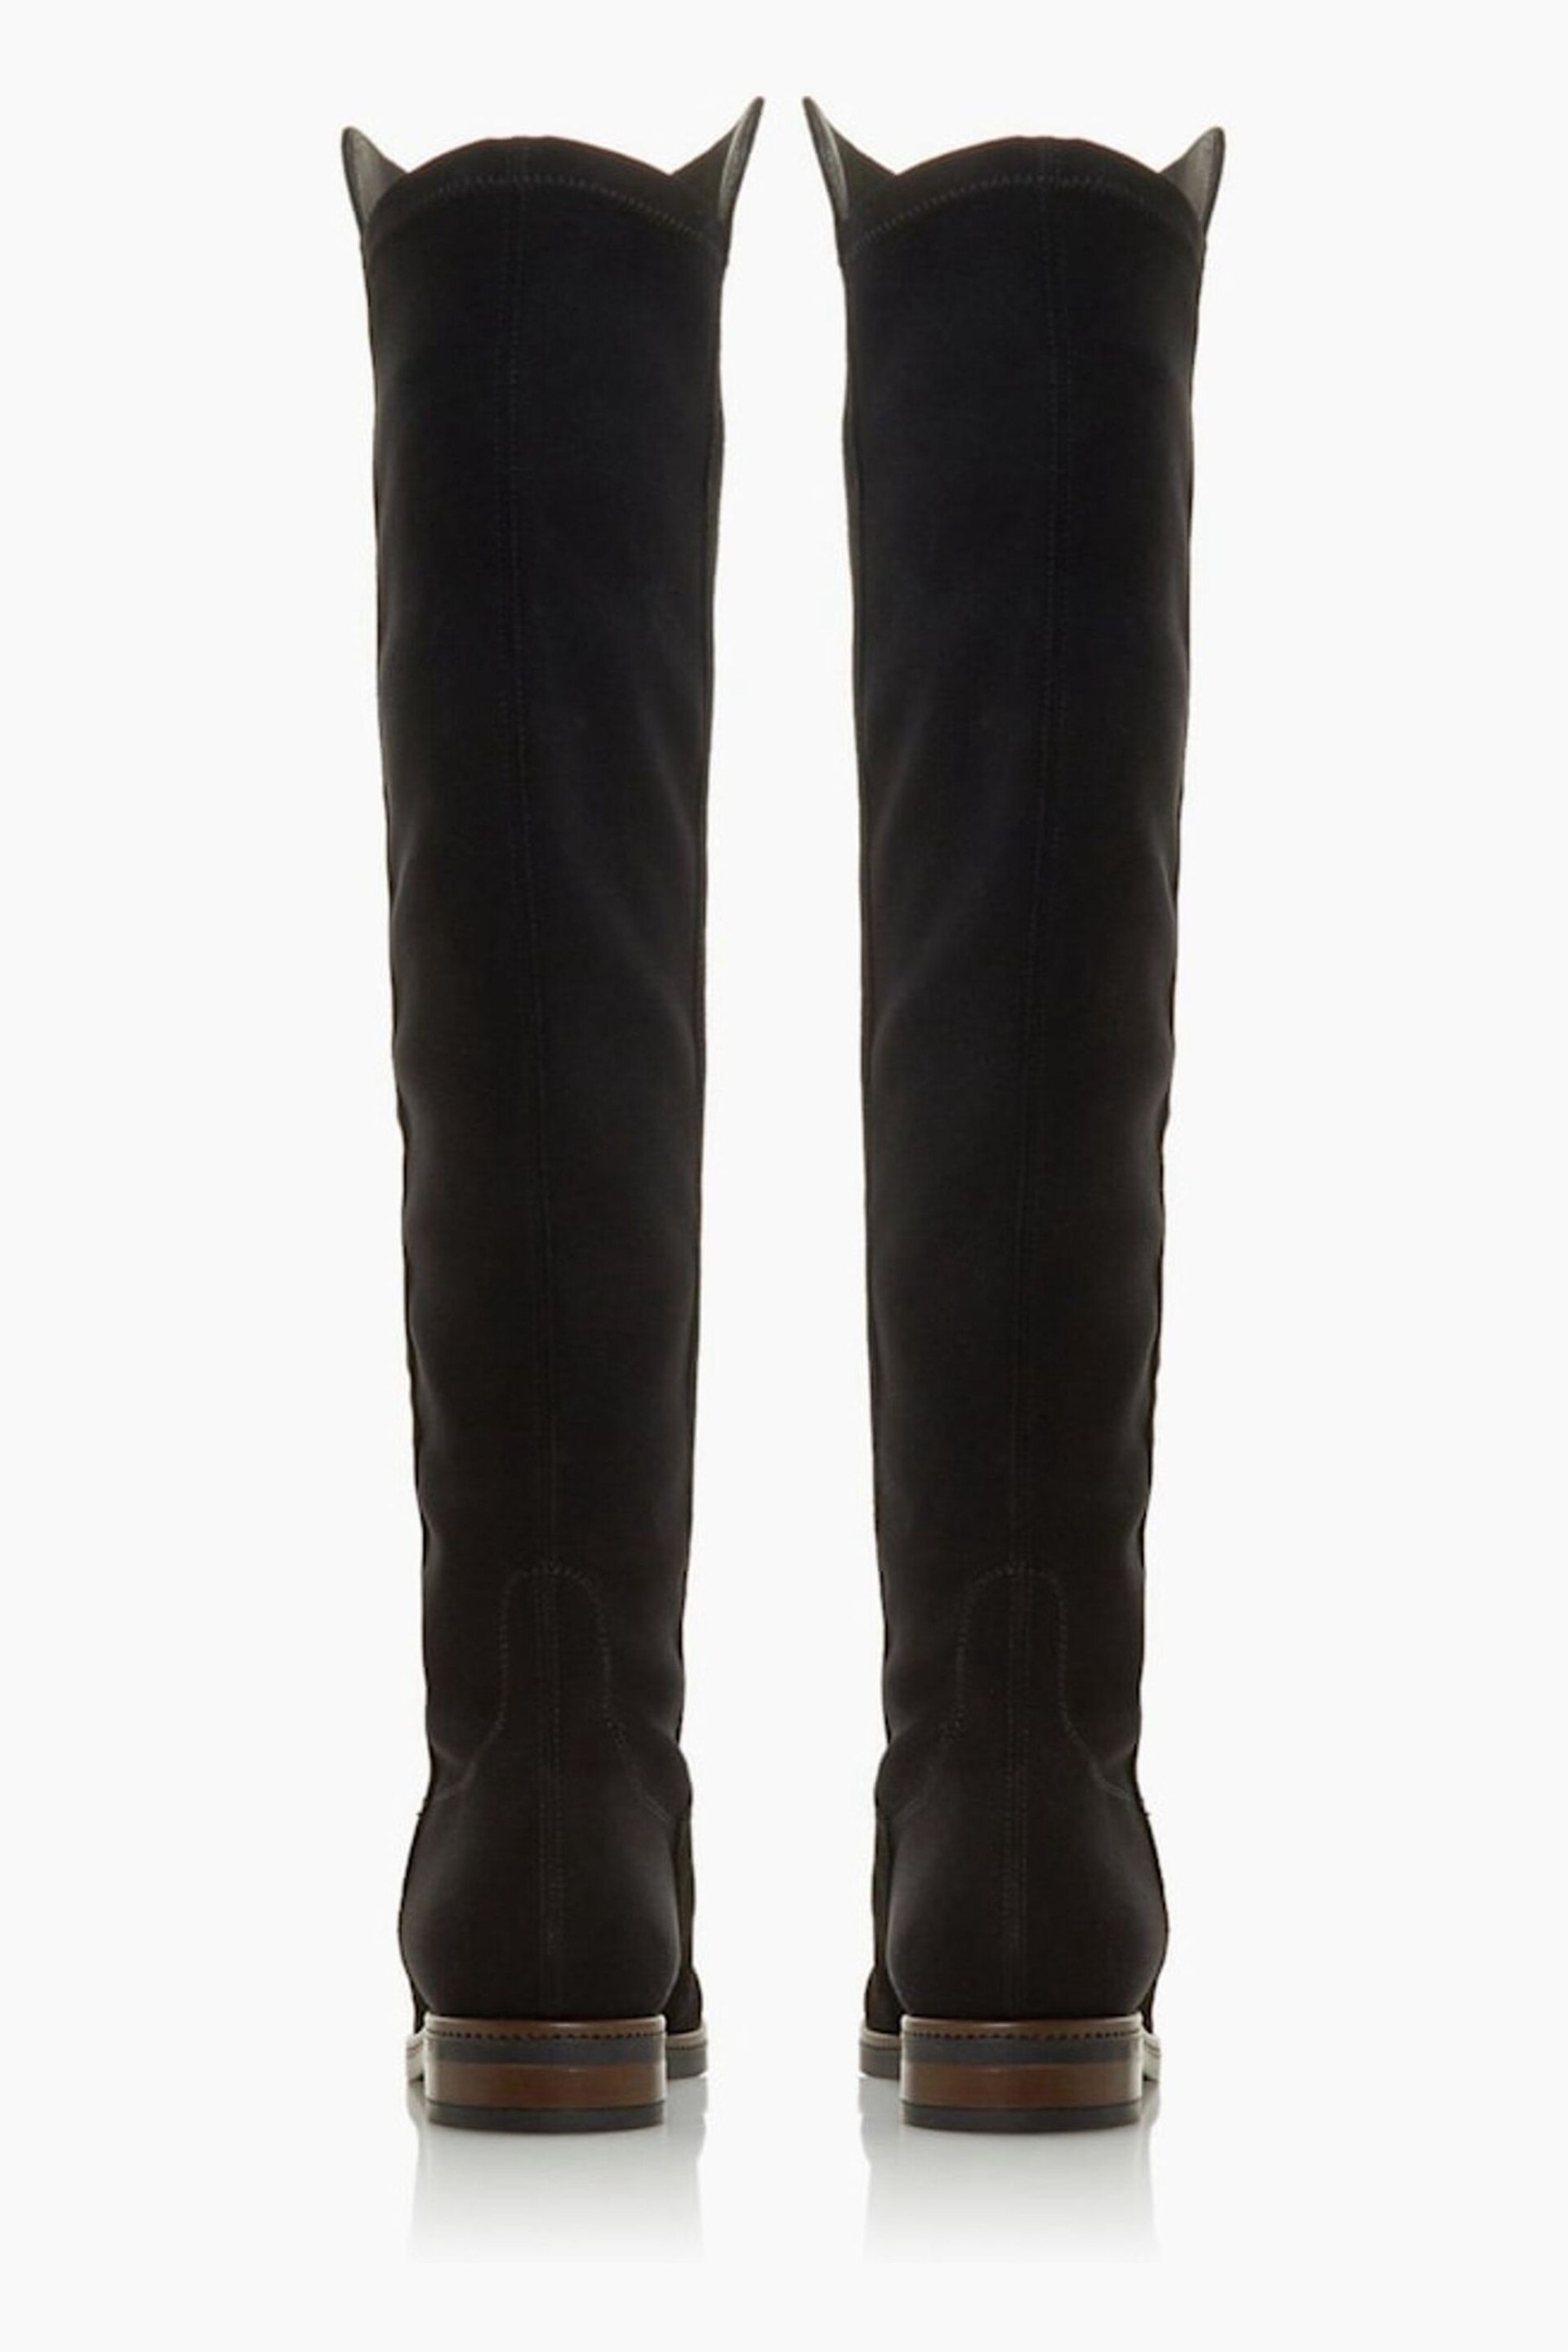 Dune London Black Tropic Over The Knee Suede Stretch Boots - Image 2 of 6